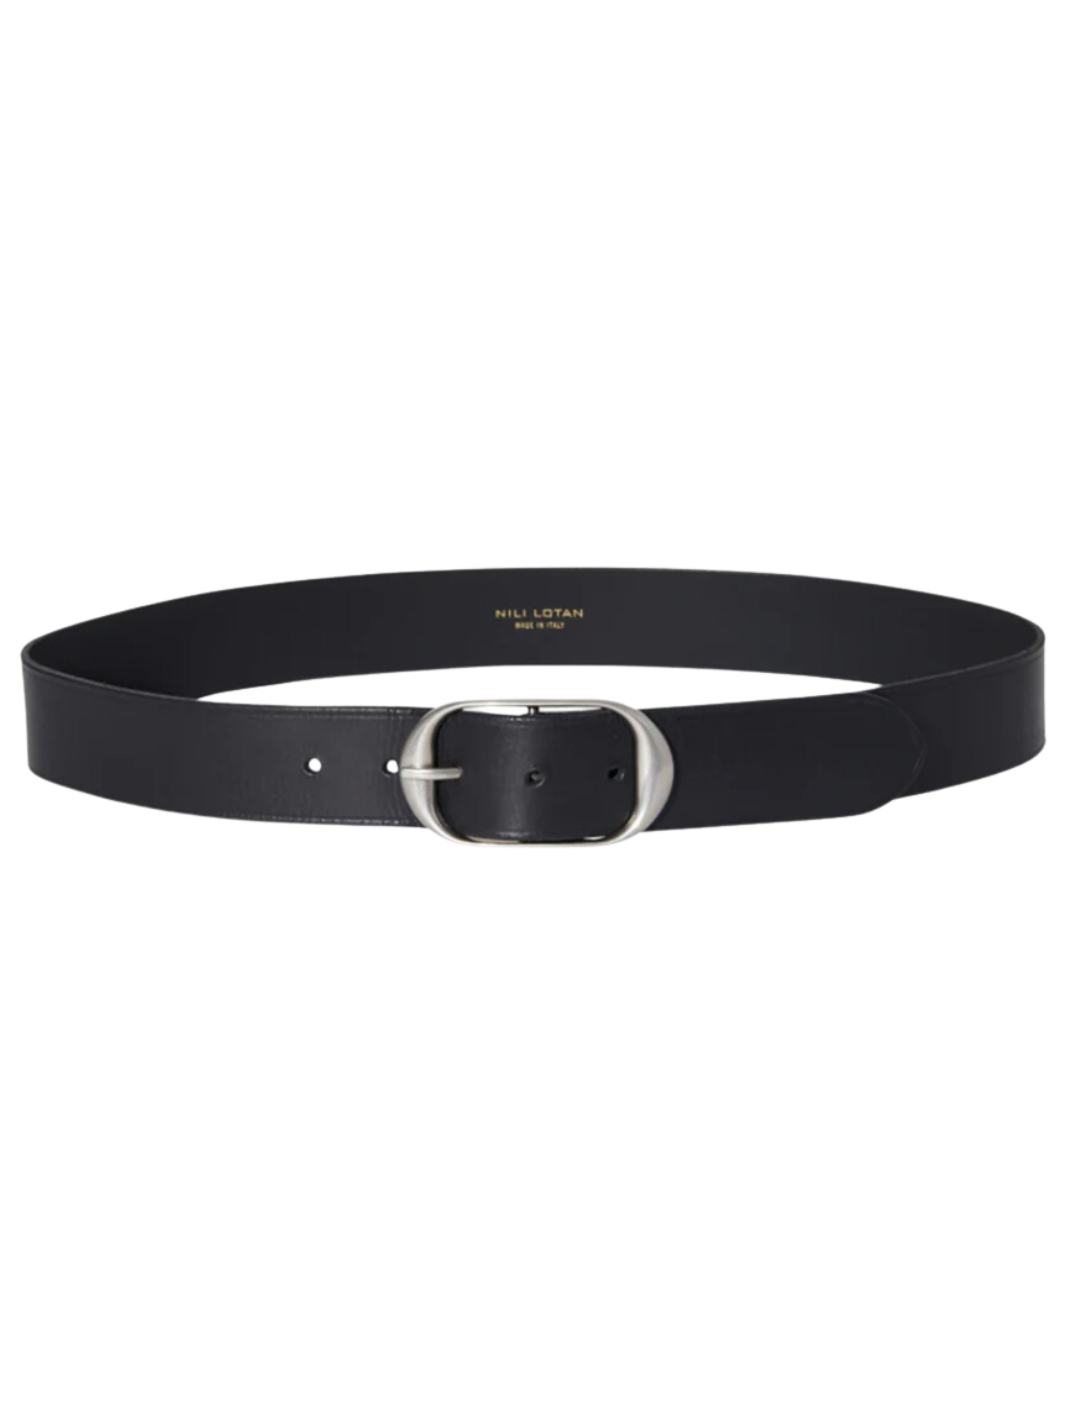 NILI BELT IN BLACK WITH SILVER - Romi Boutique